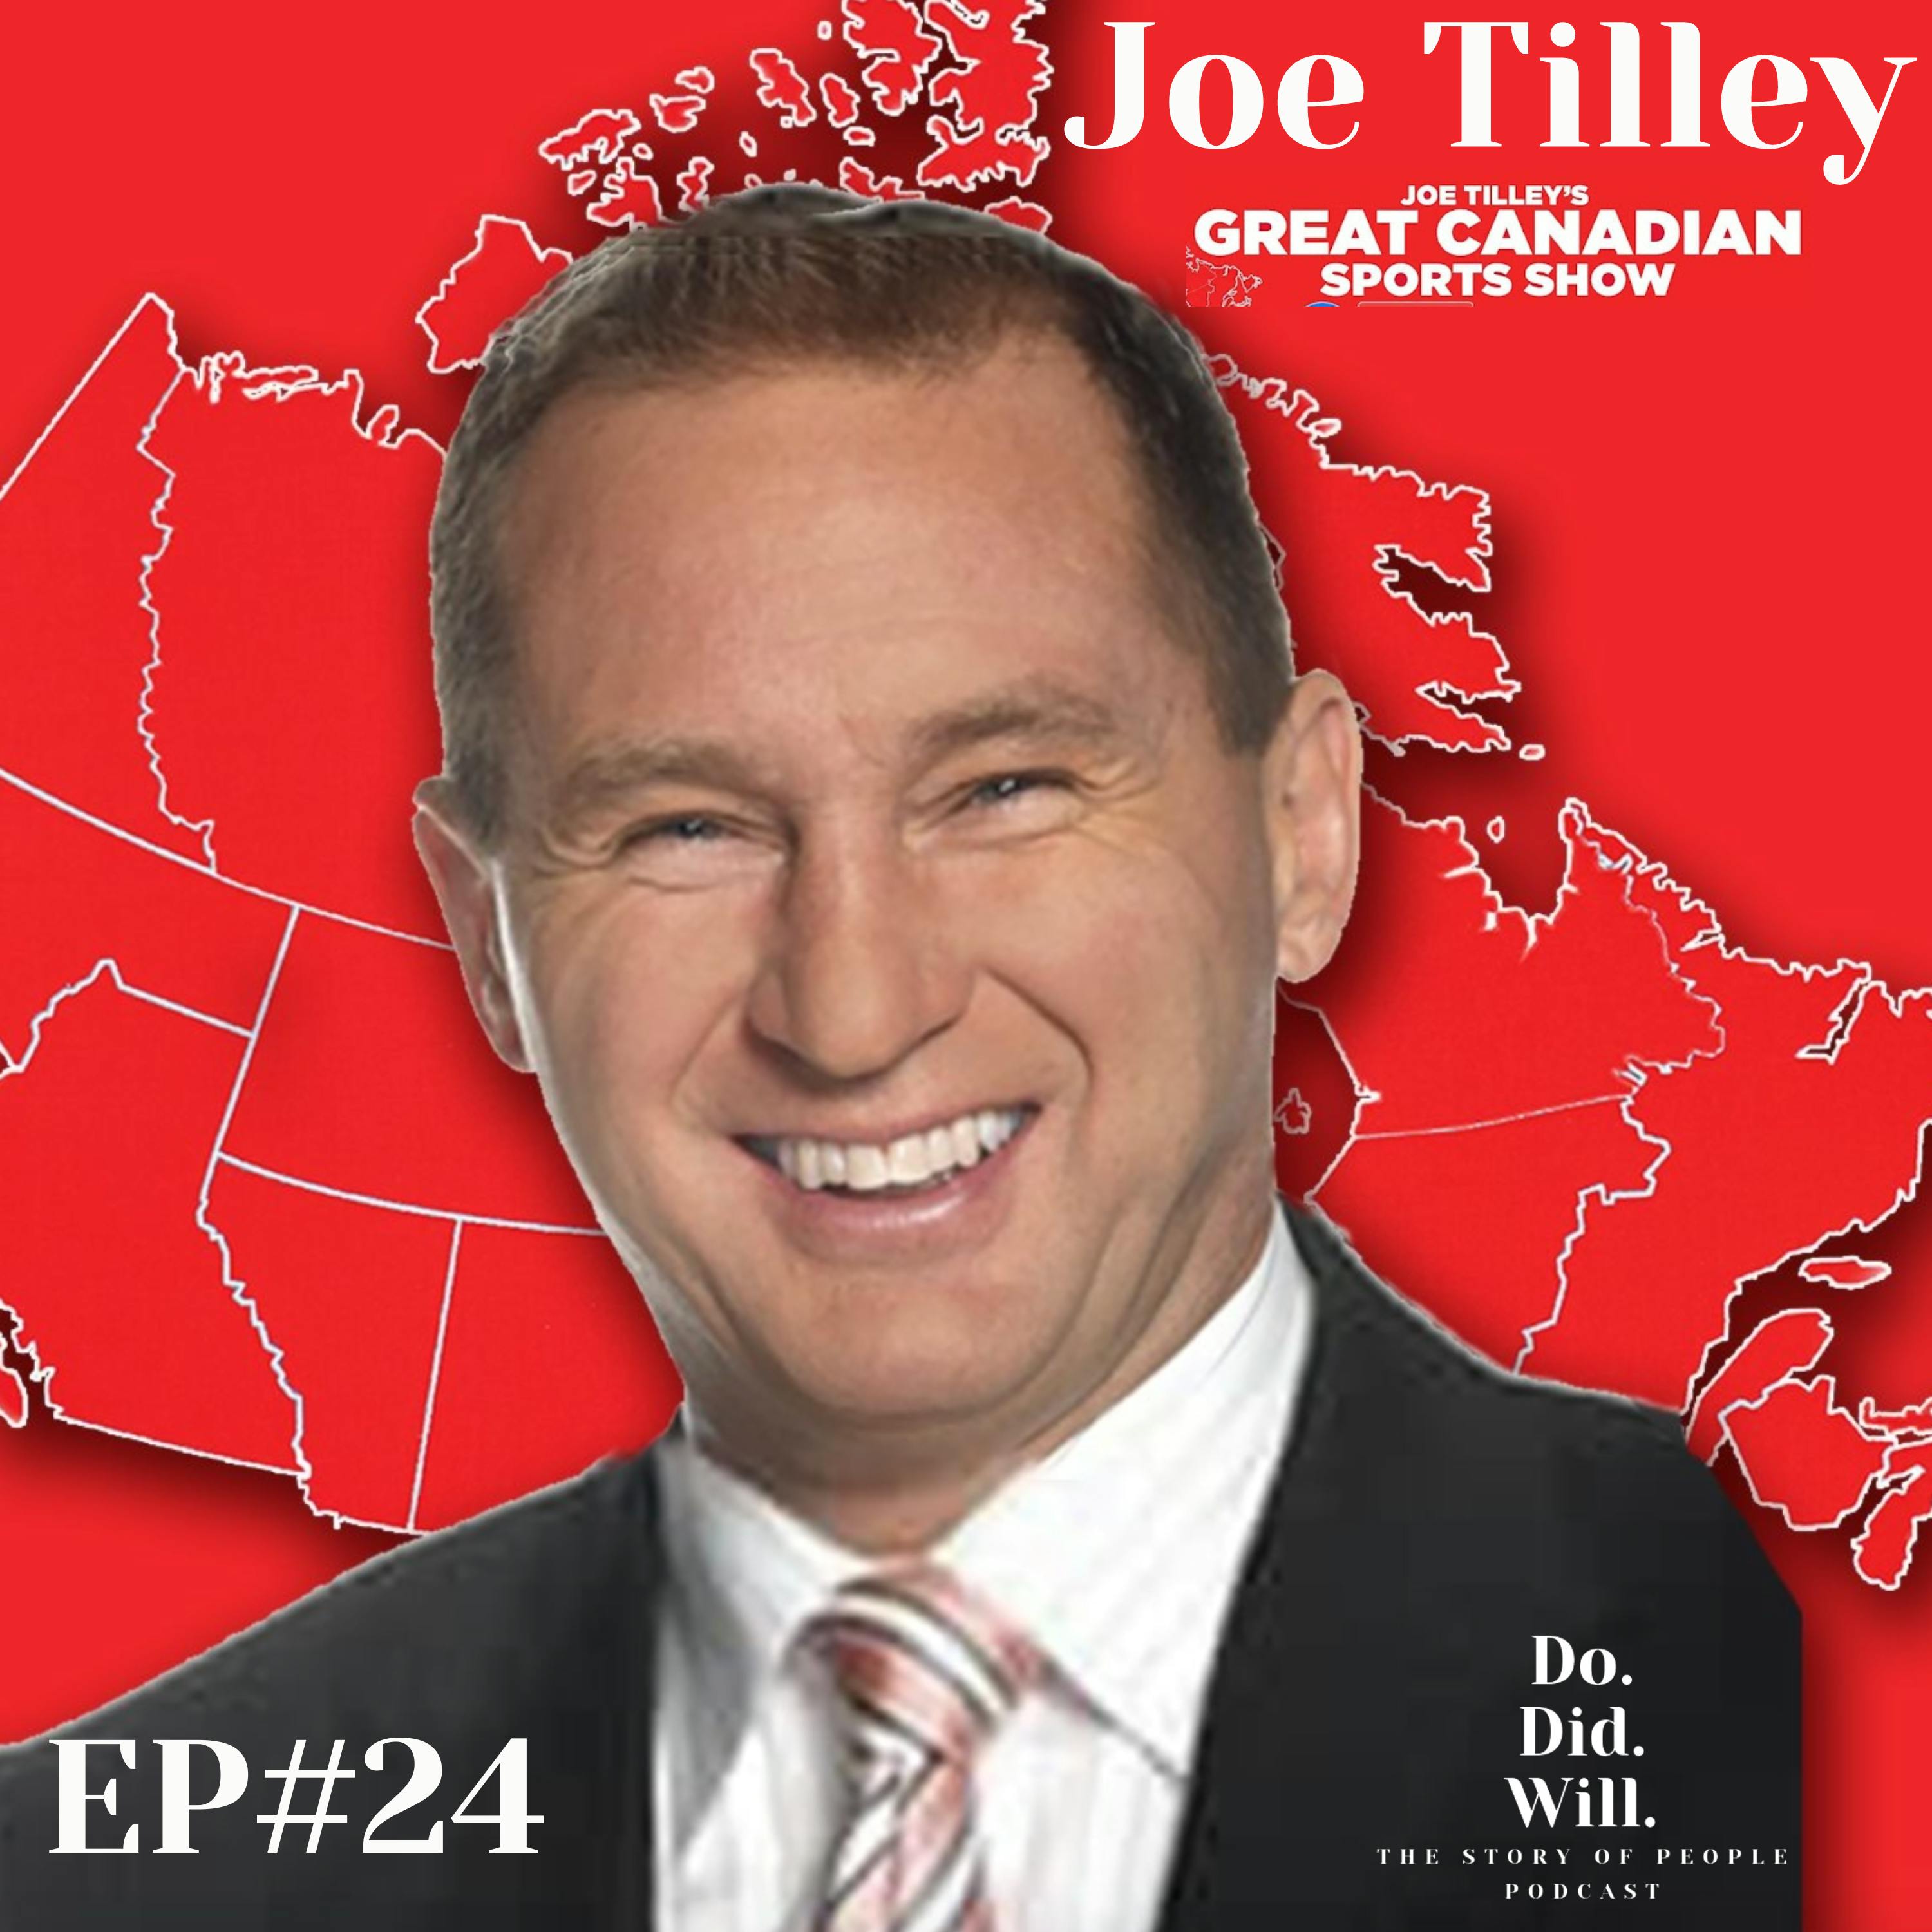 Joe Tilley (The Great Canadian Sports Show)